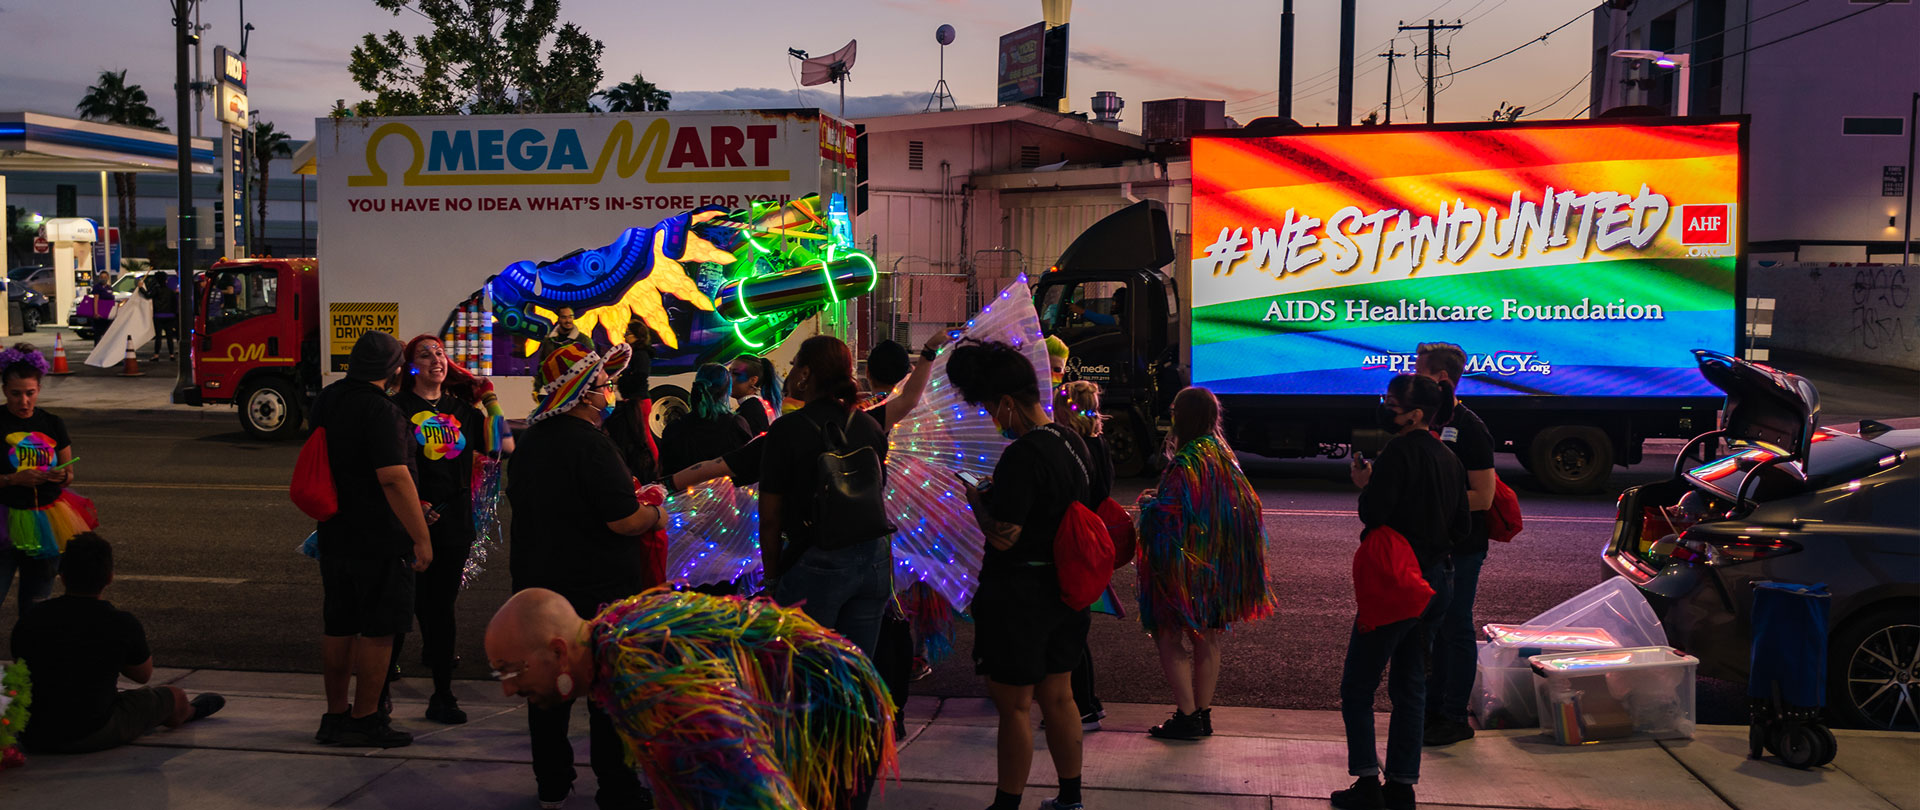 Omega Mart custom truck, with an open side, tubes, sun and cans lit up within, rolling in front of a digital billboard truck at the las vegas pride parade